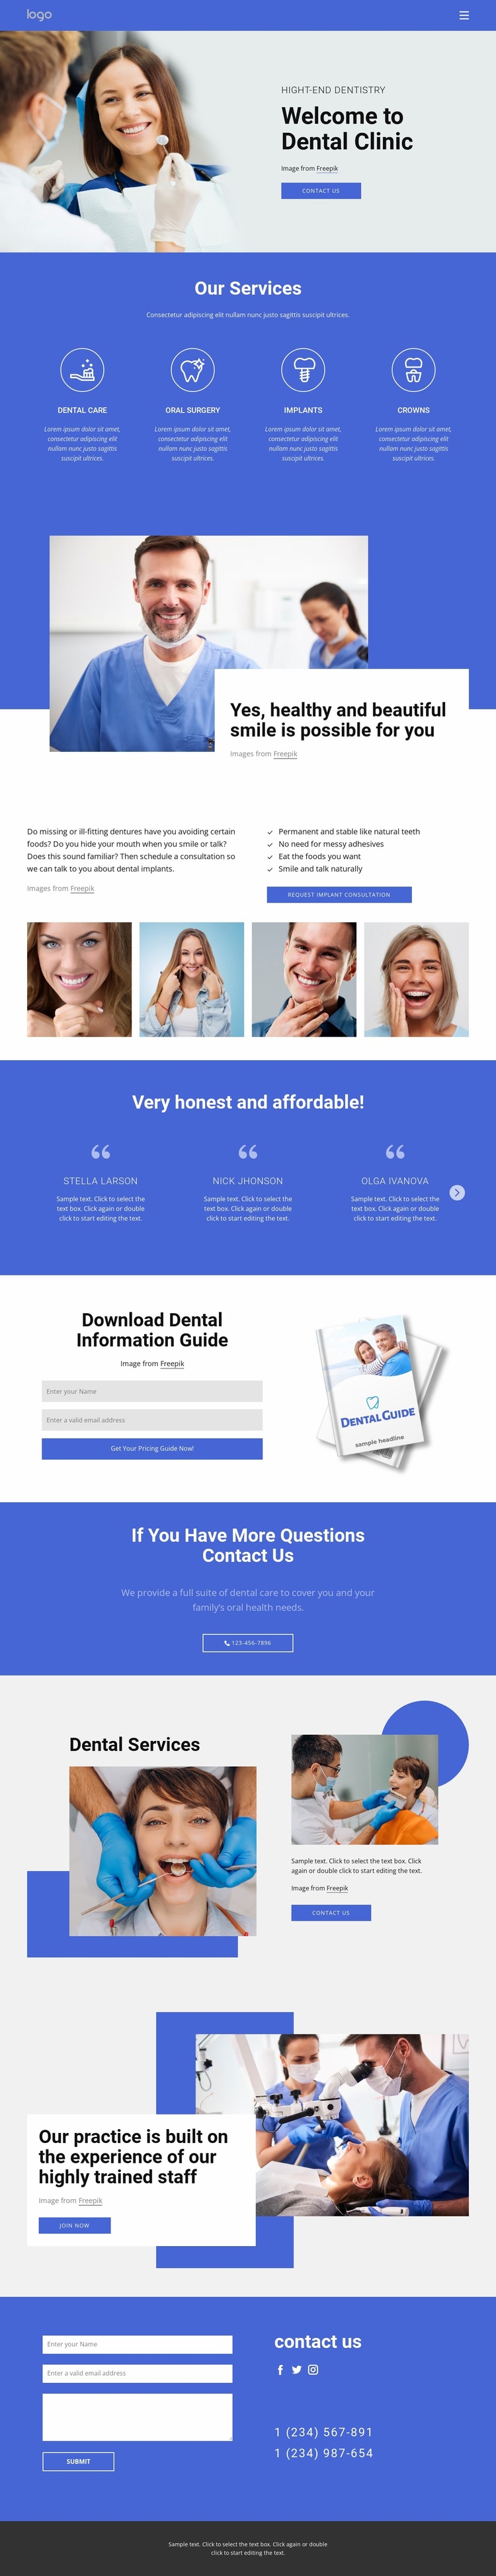 Welcome to dental clinic Landing Page